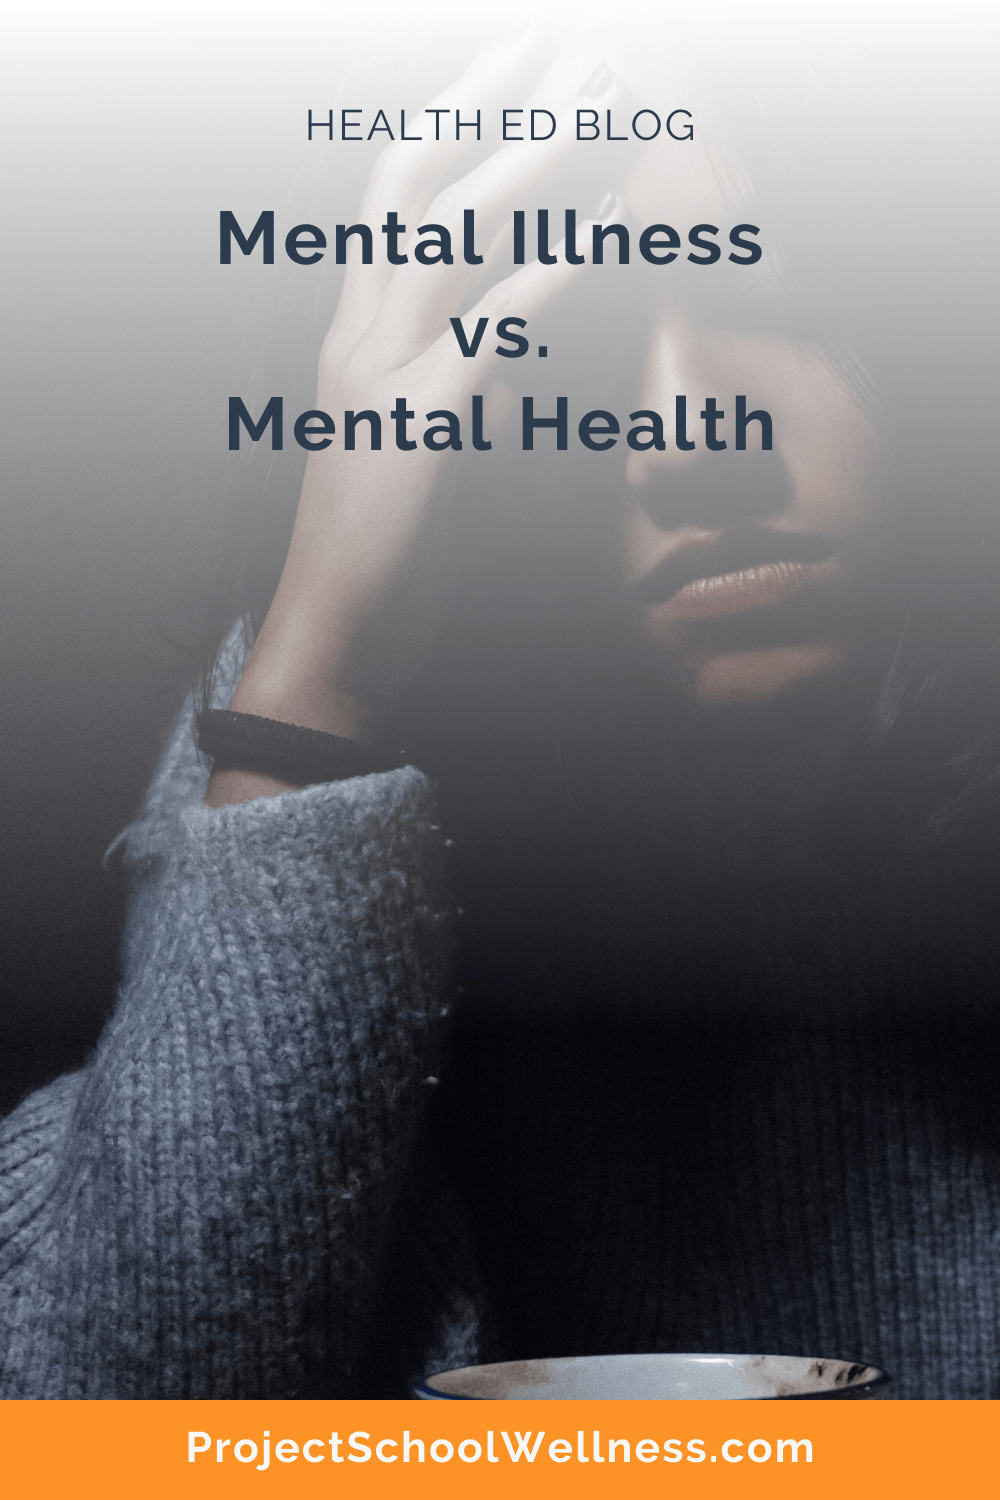 Health Education Blog - Understanding the difference between Mental Illness and Mental Health - Tips for boosting students' Mental Health - Project School Wellness